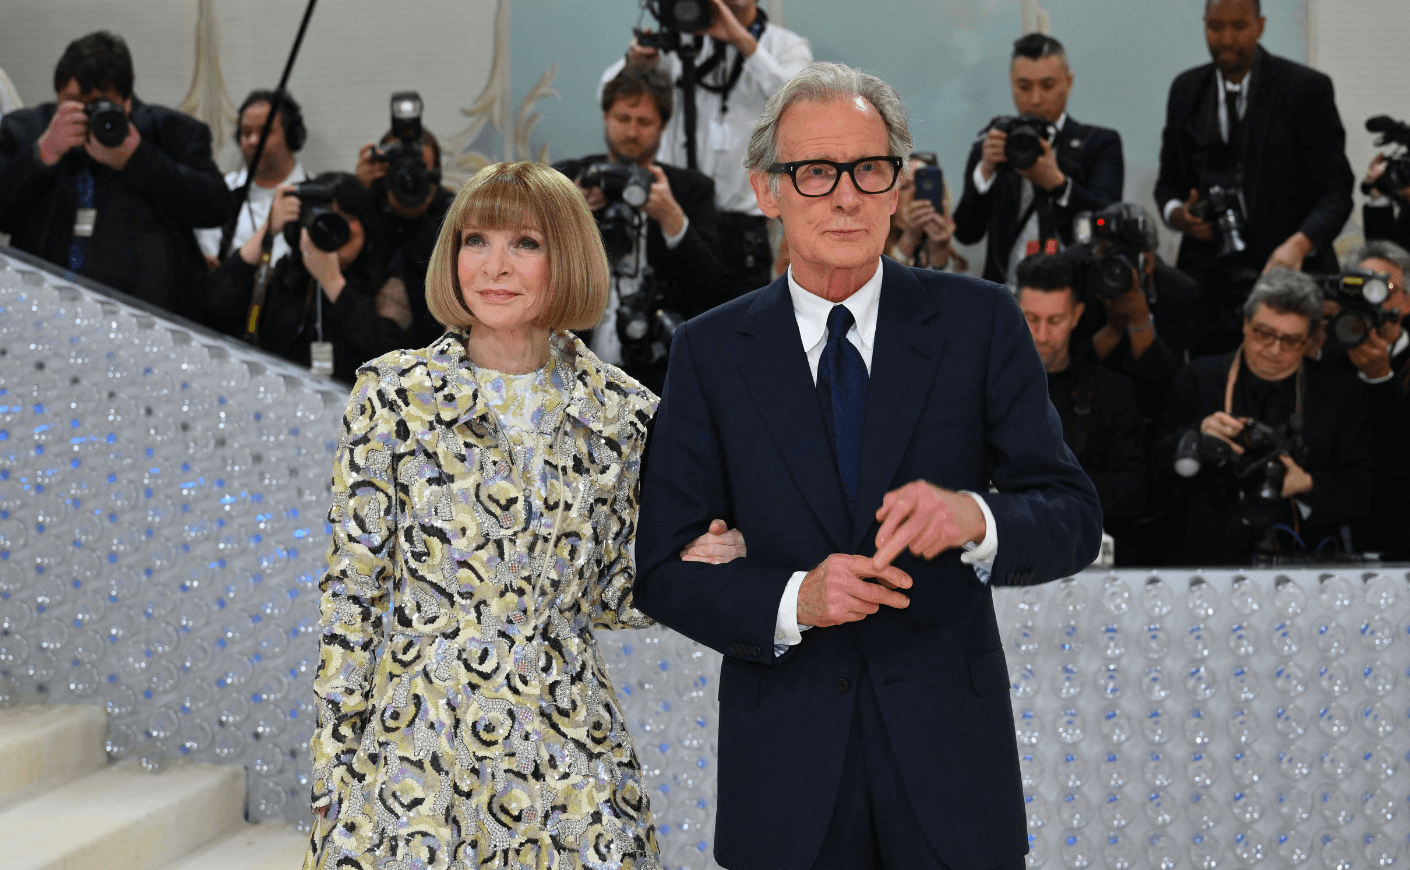 Anna Wintour and Bill Nighy at the Met Gala